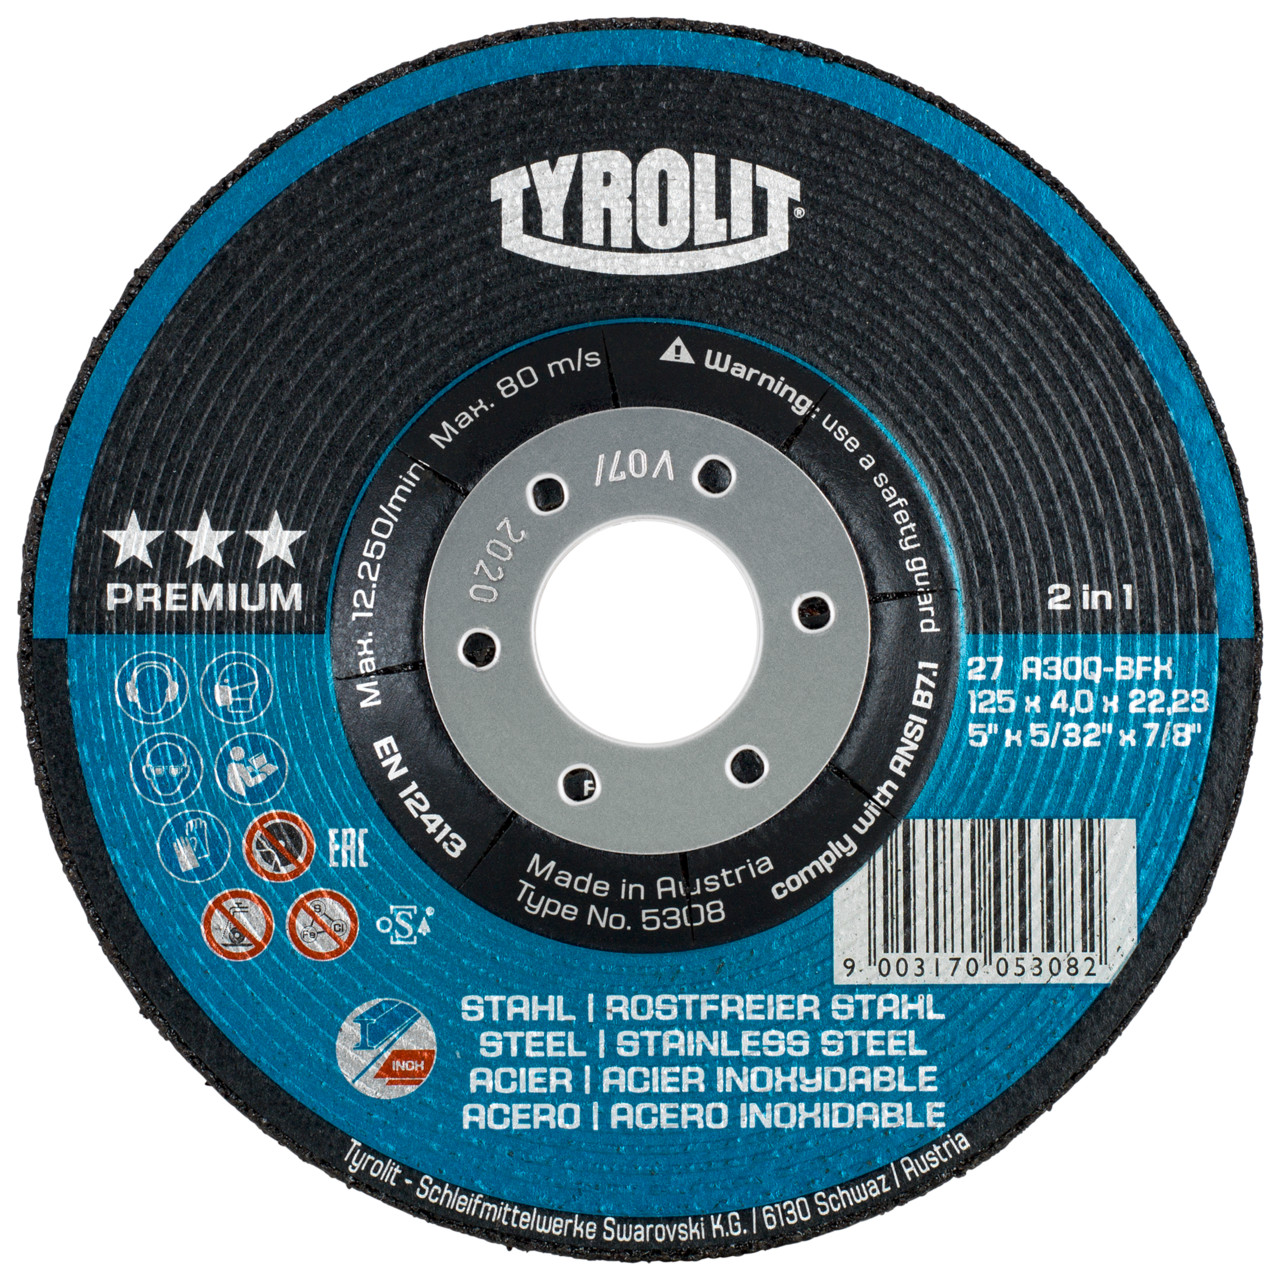 TYROLIT grinding wheel DxUxH 115x4x22.23 2in1 for steel and stainless steel, shape: 27 - offset version, Art. 5287